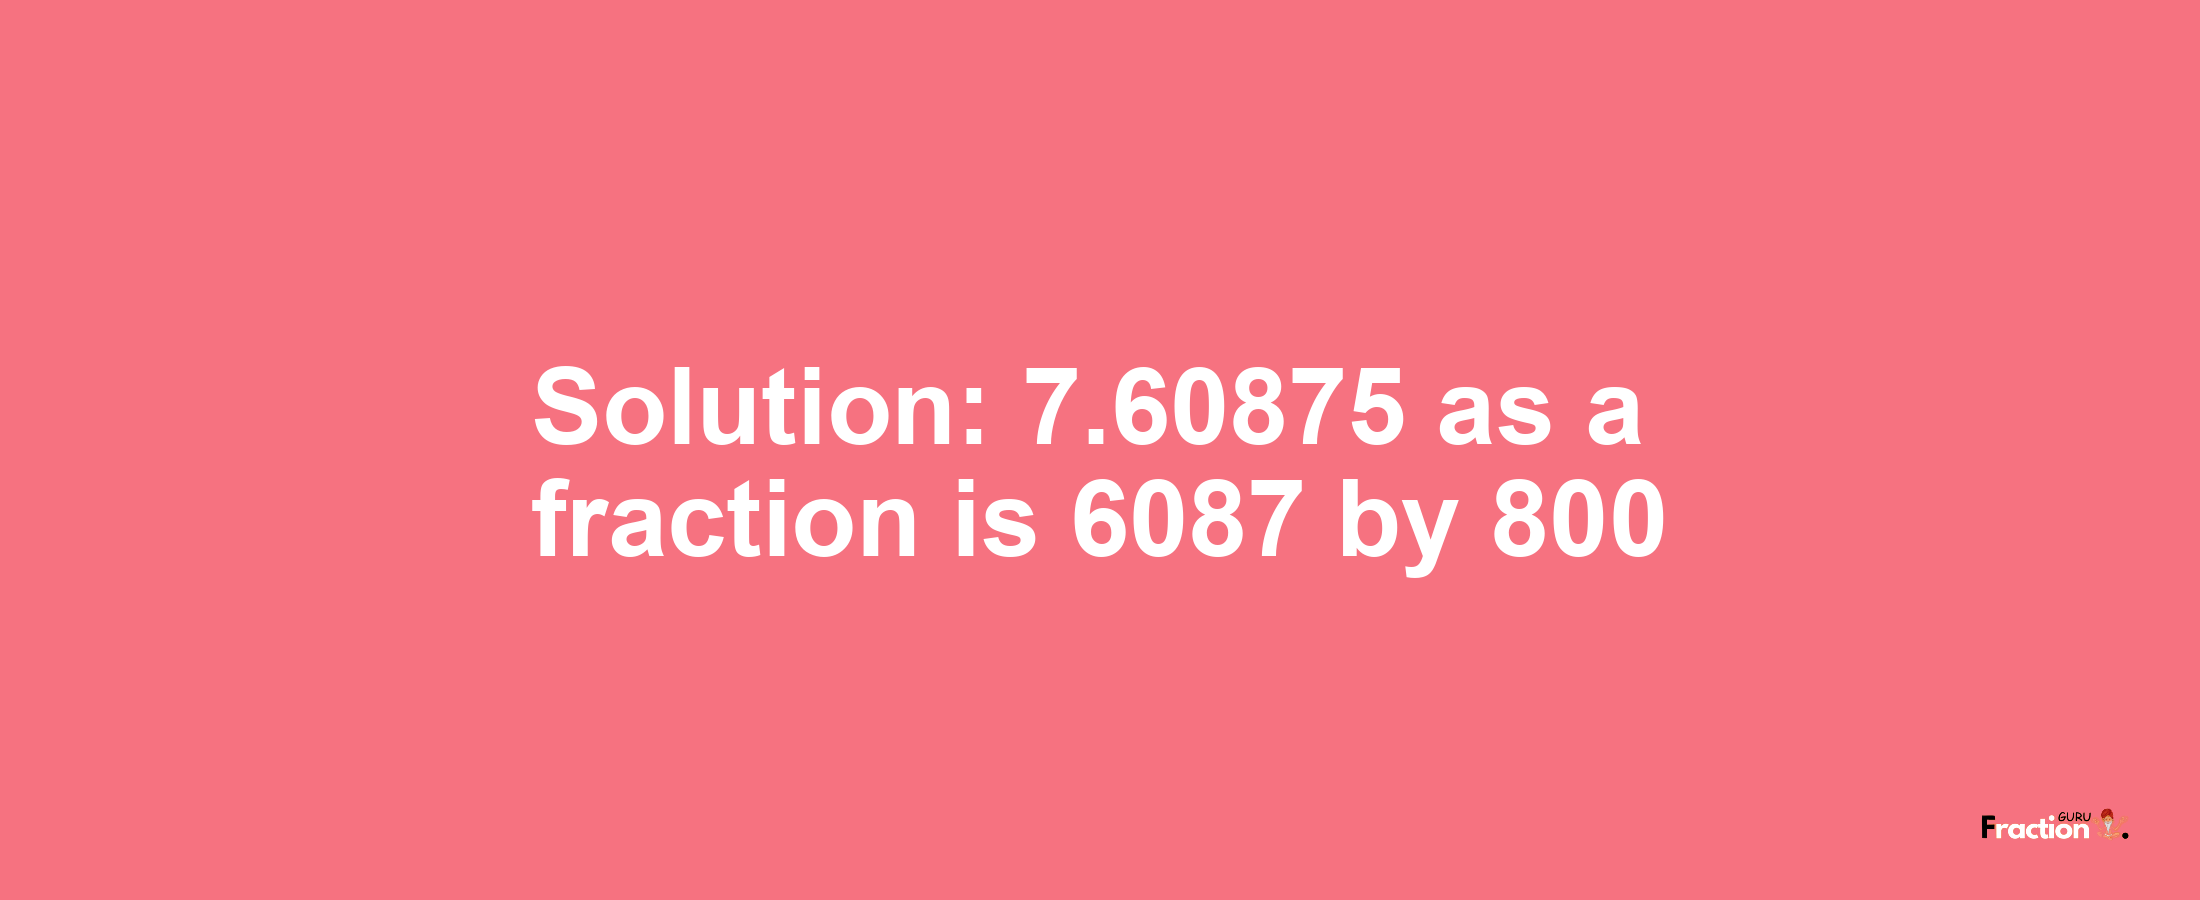 Solution:7.60875 as a fraction is 6087/800